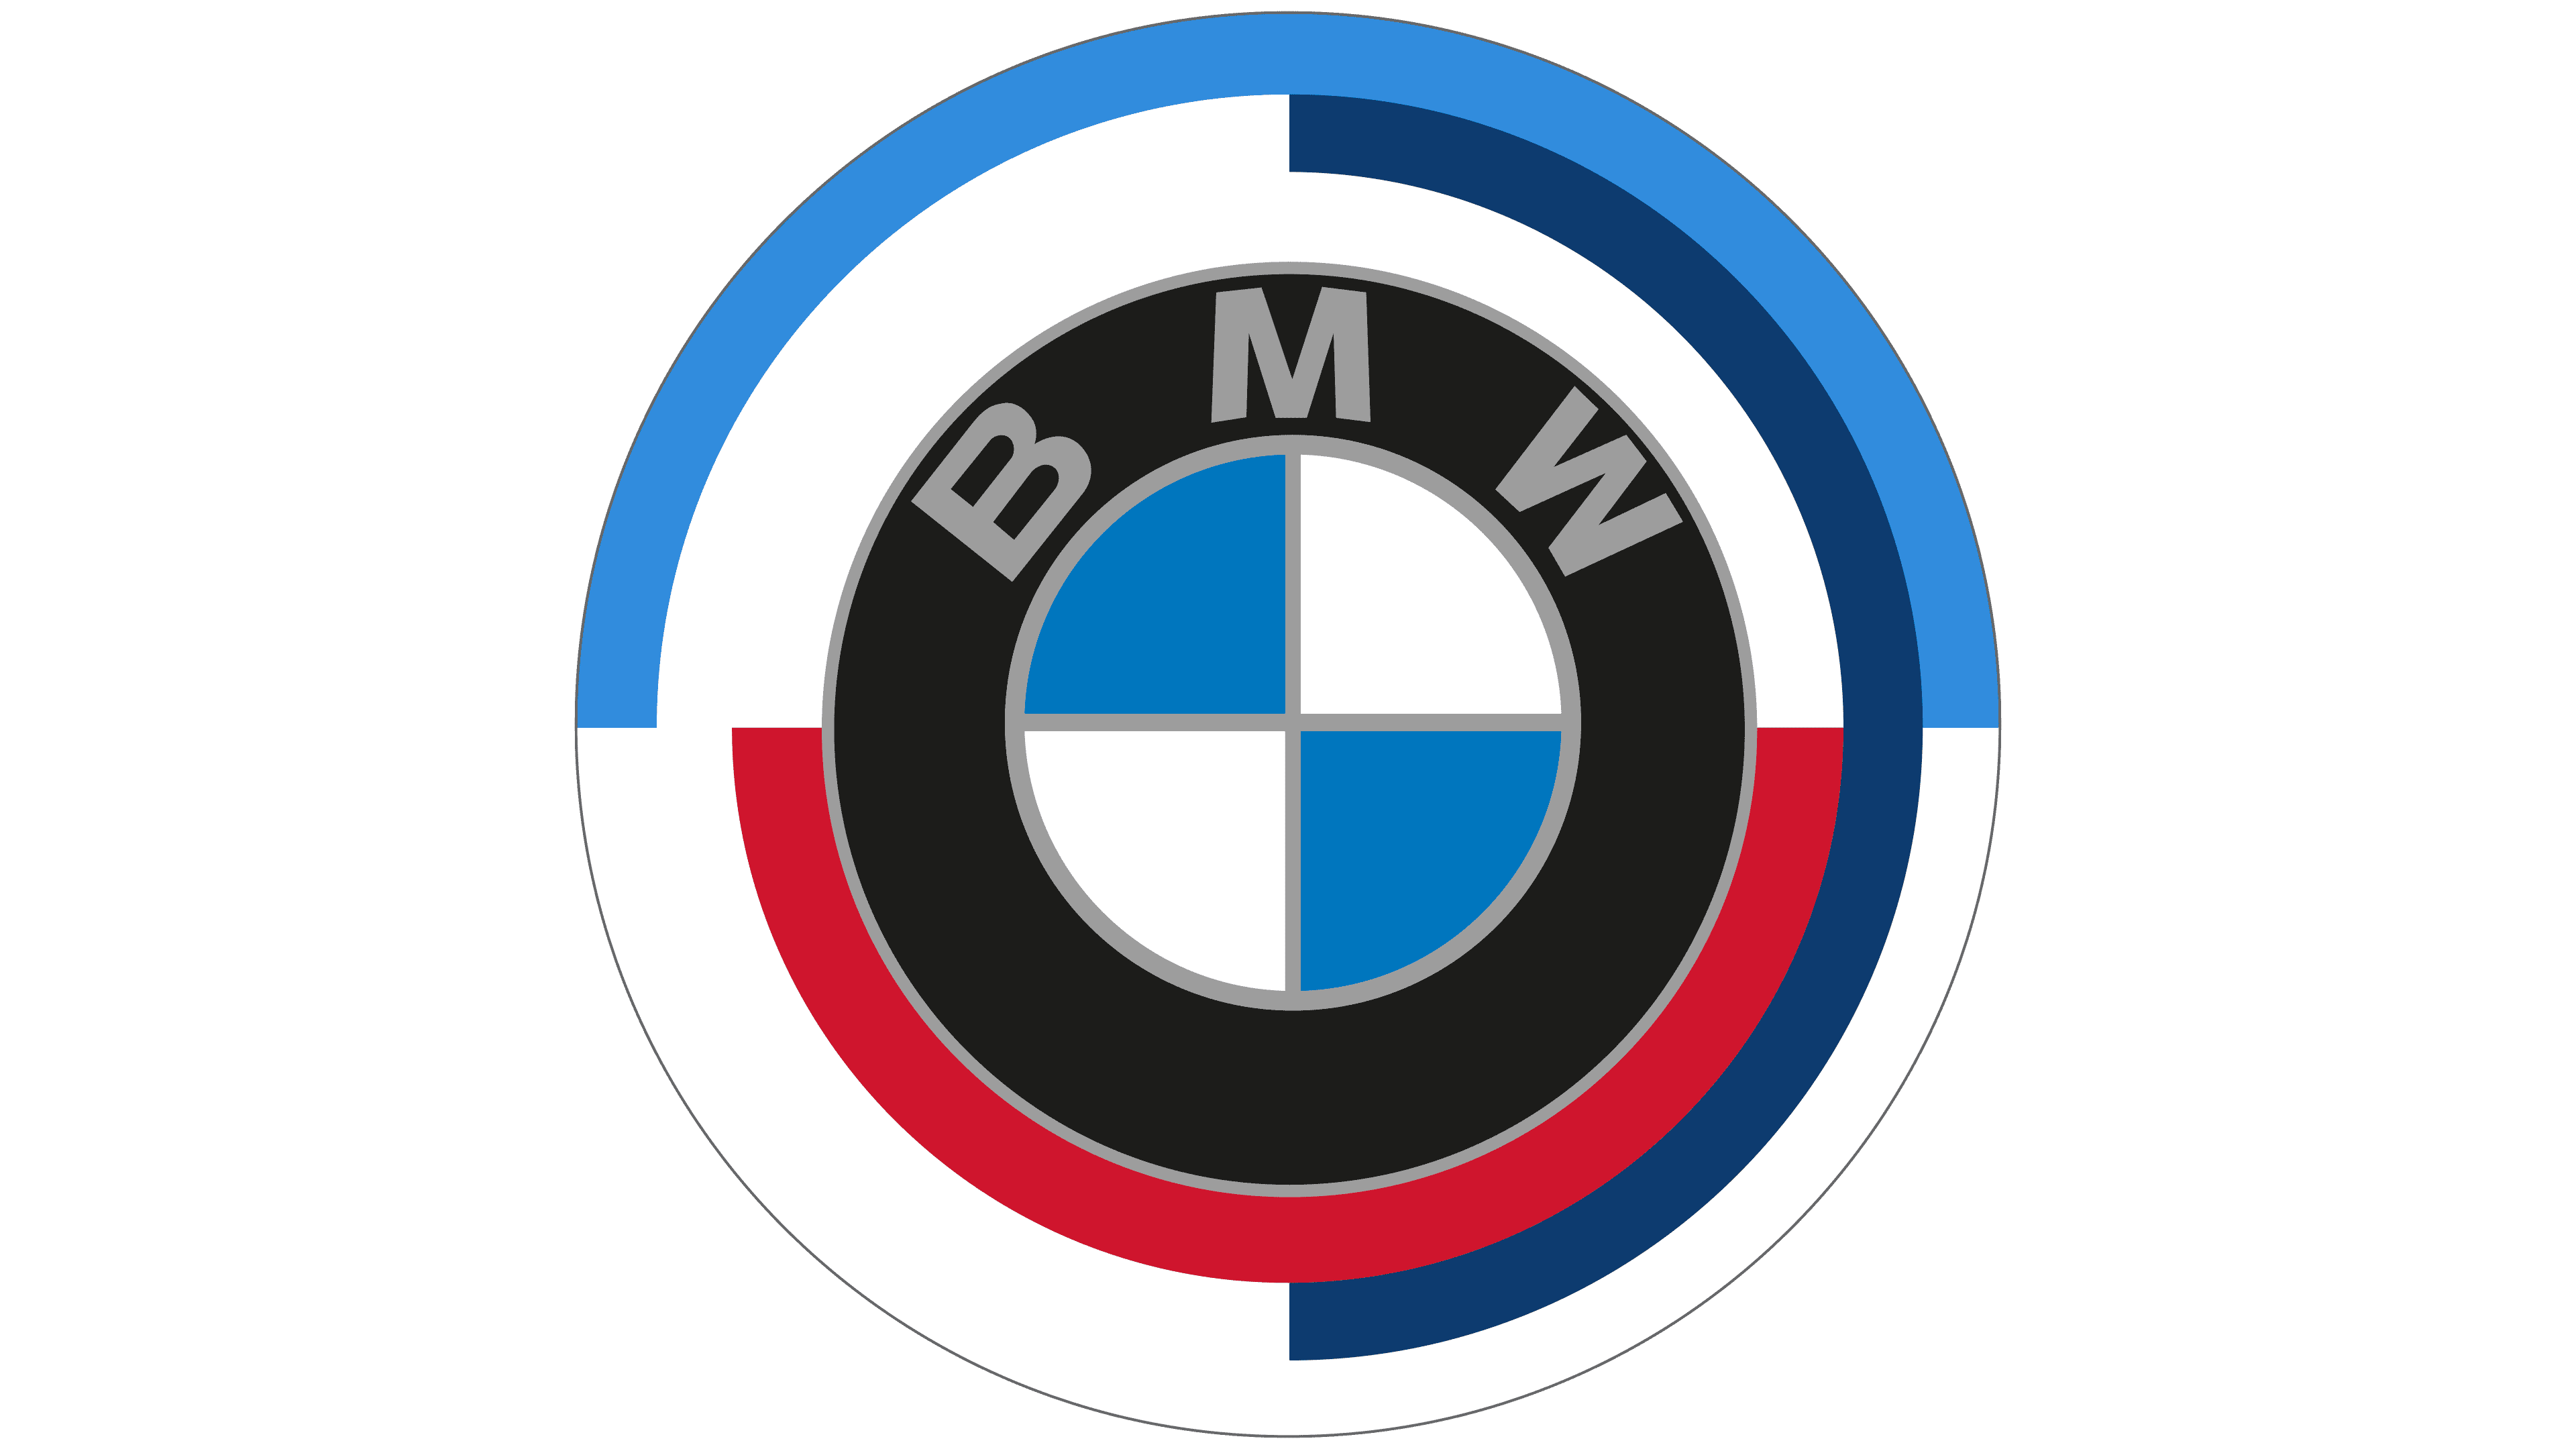 BMW M Logo and symbol, meaning, history, sign.